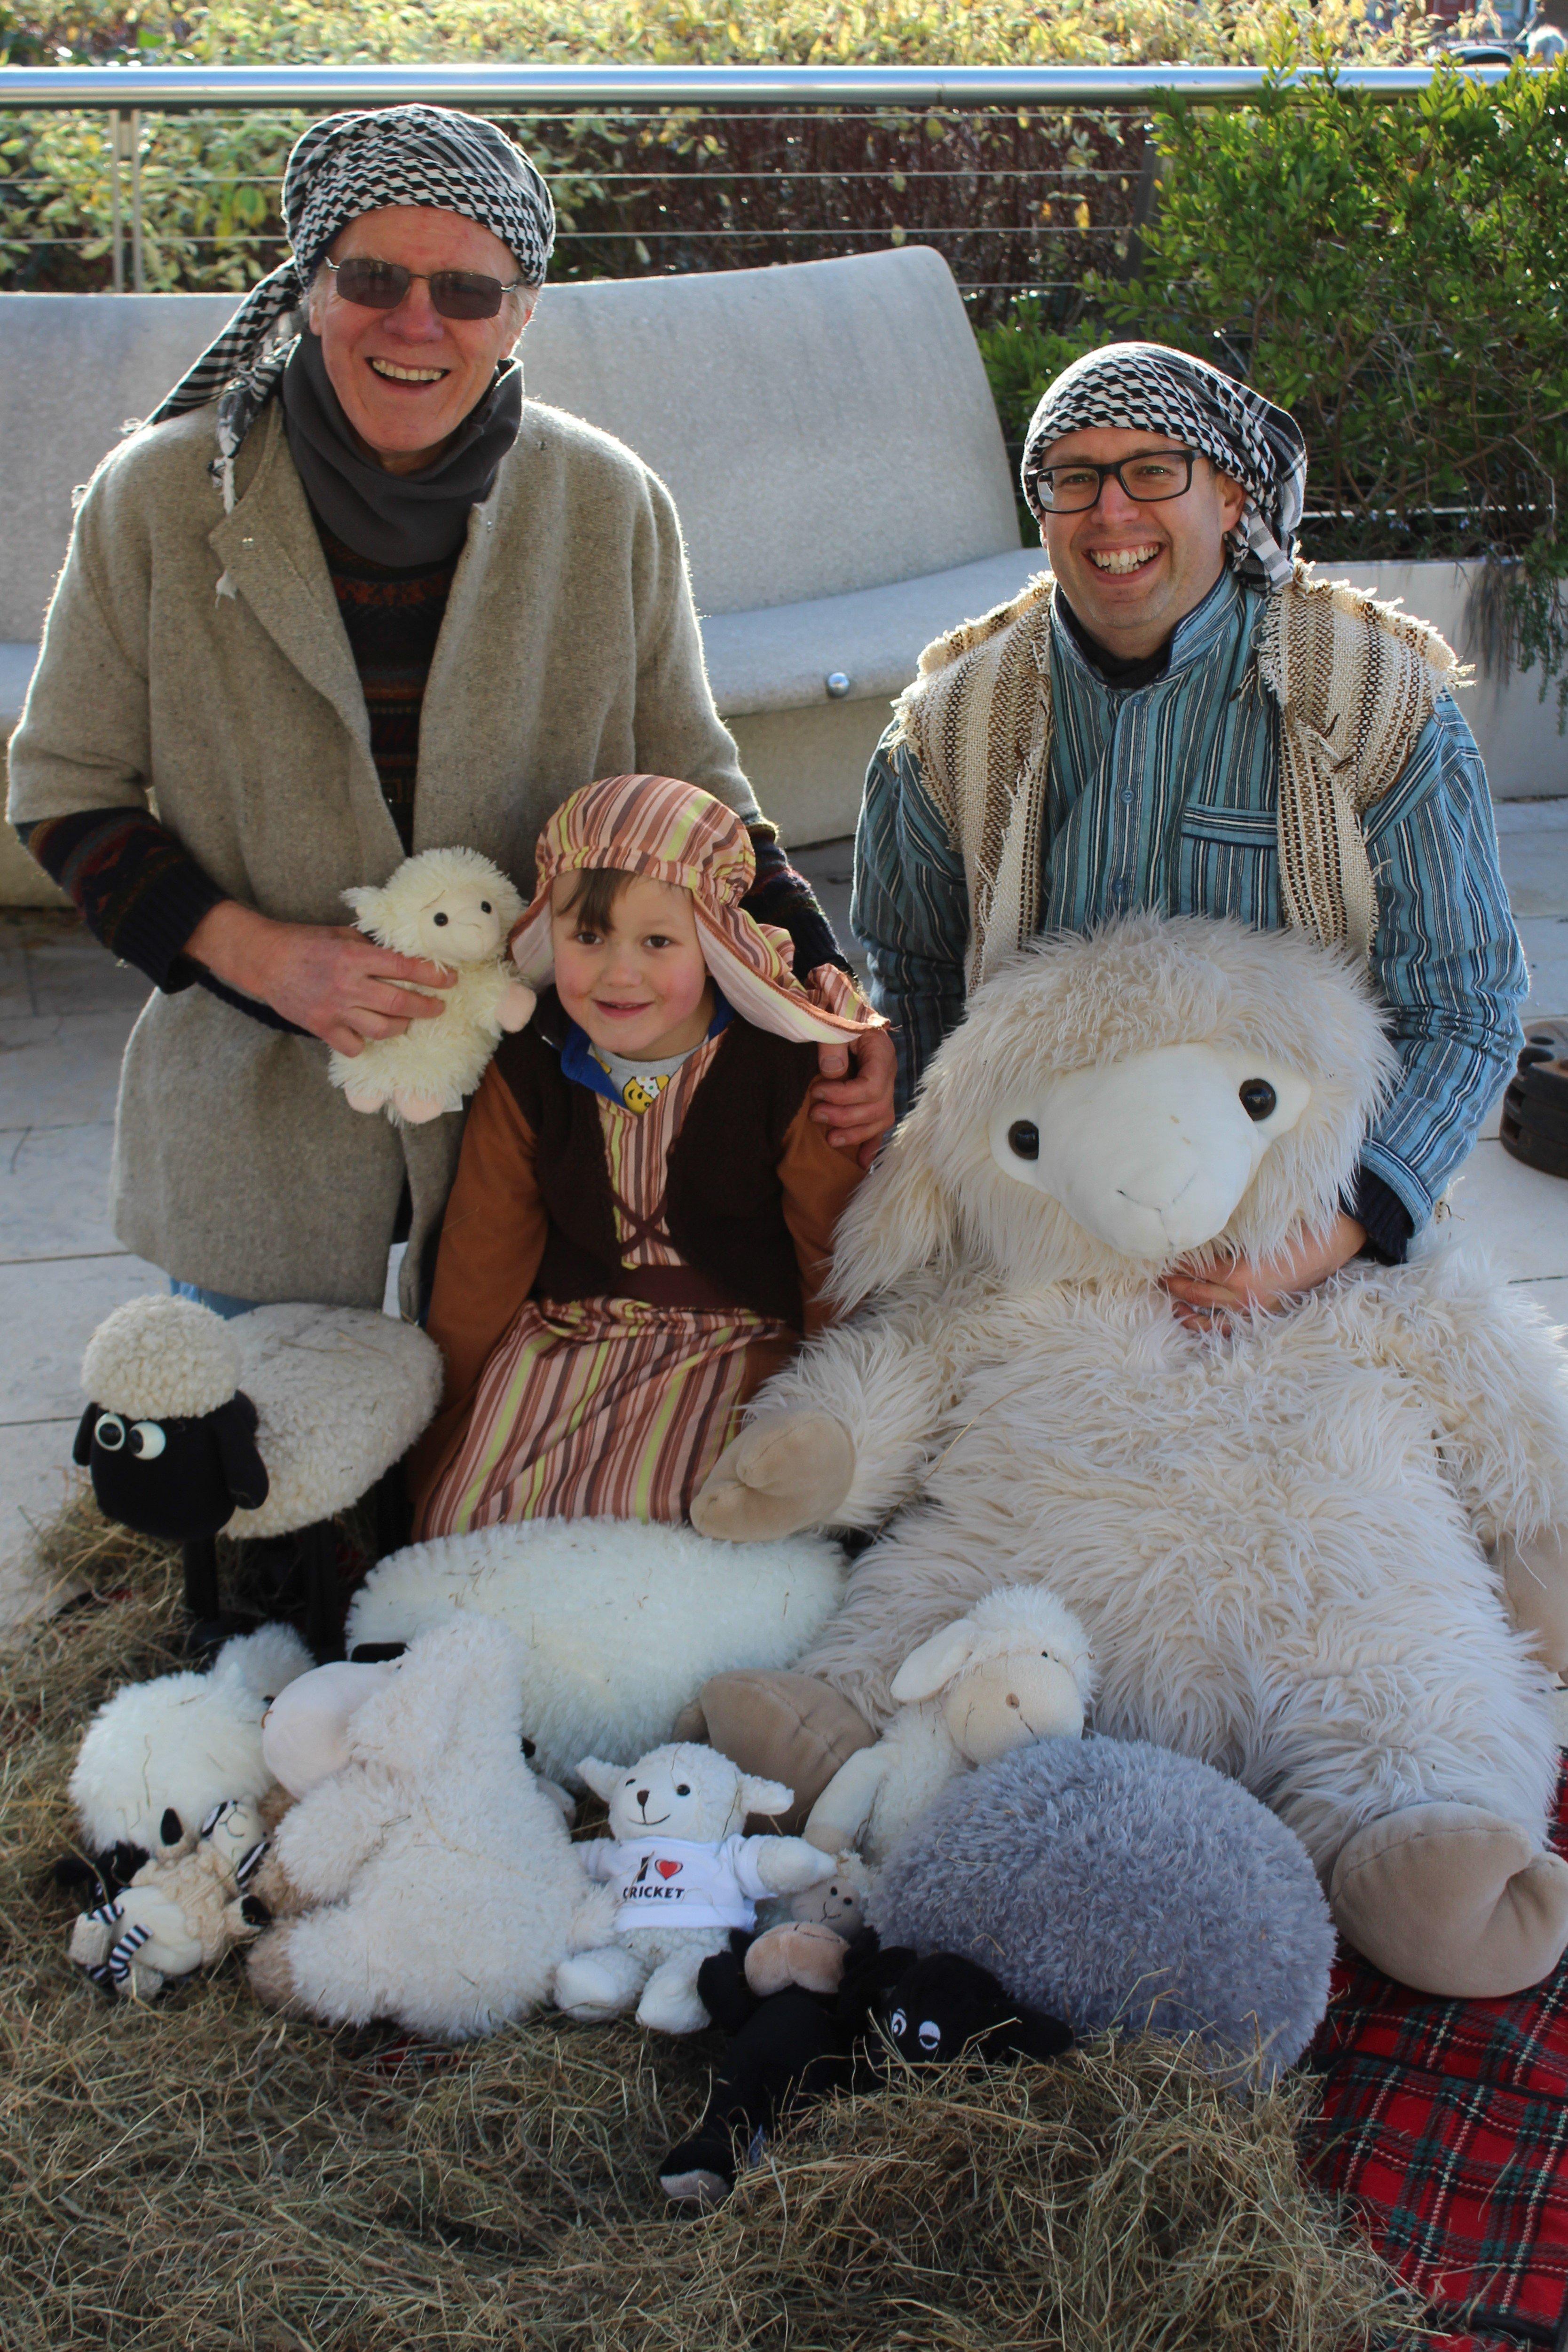 Shepherds at the event. Photo by Lydia Petch